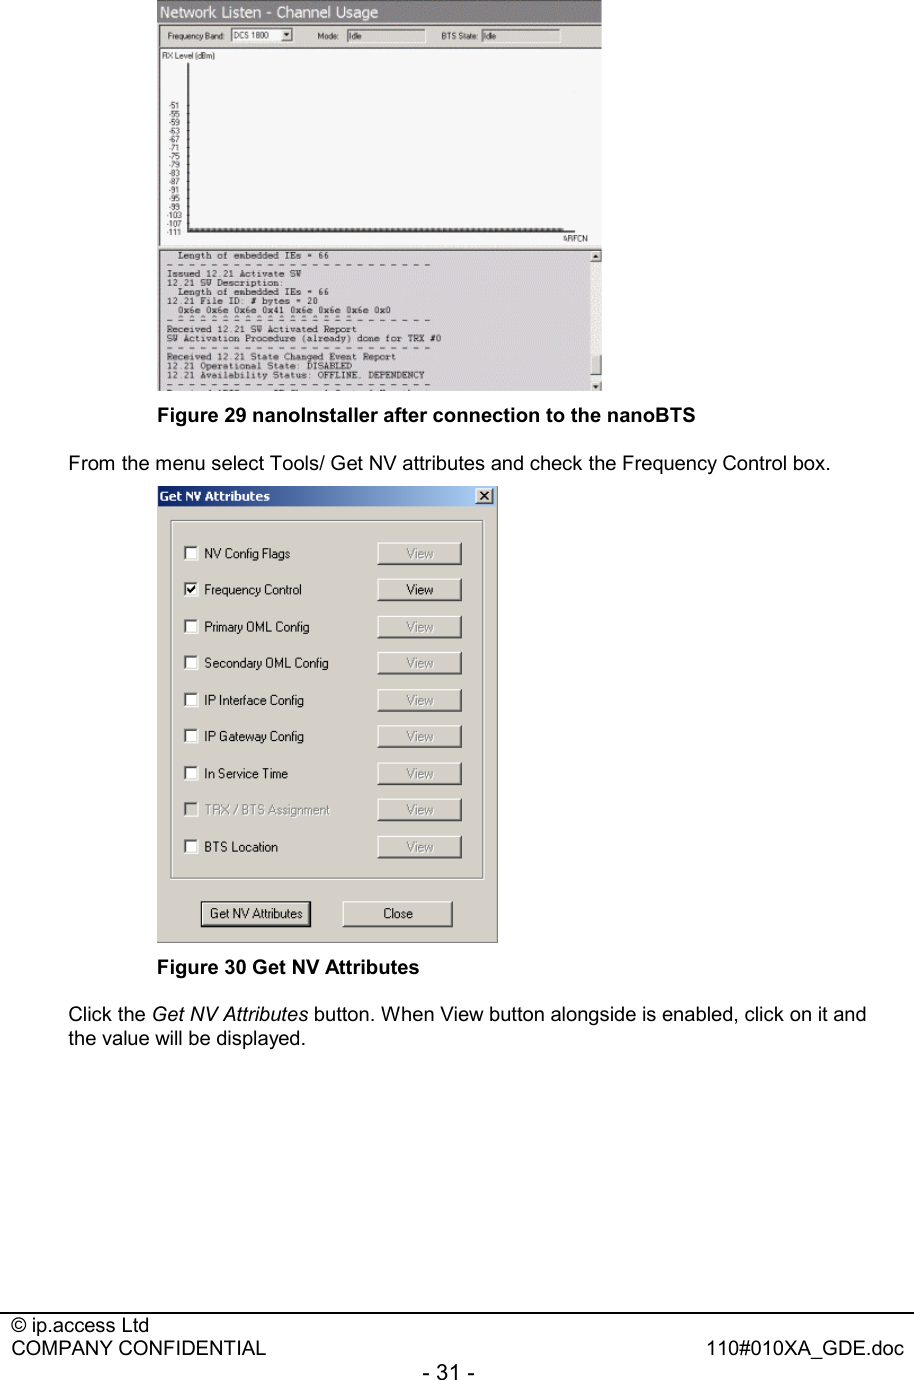  © ip.access Ltd   COMPANY CONFIDENTIAL  110#010XA_GDE.doc - 31 -   Figure 29 nanoInstaller after connection to the nanoBTS From the menu select Tools/ Get NV attributes and check the Frequency Control box.  Figure 30 Get NV Attributes Click the Get NV Attributes button. When View button alongside is enabled, click on it and the value will be displayed.  